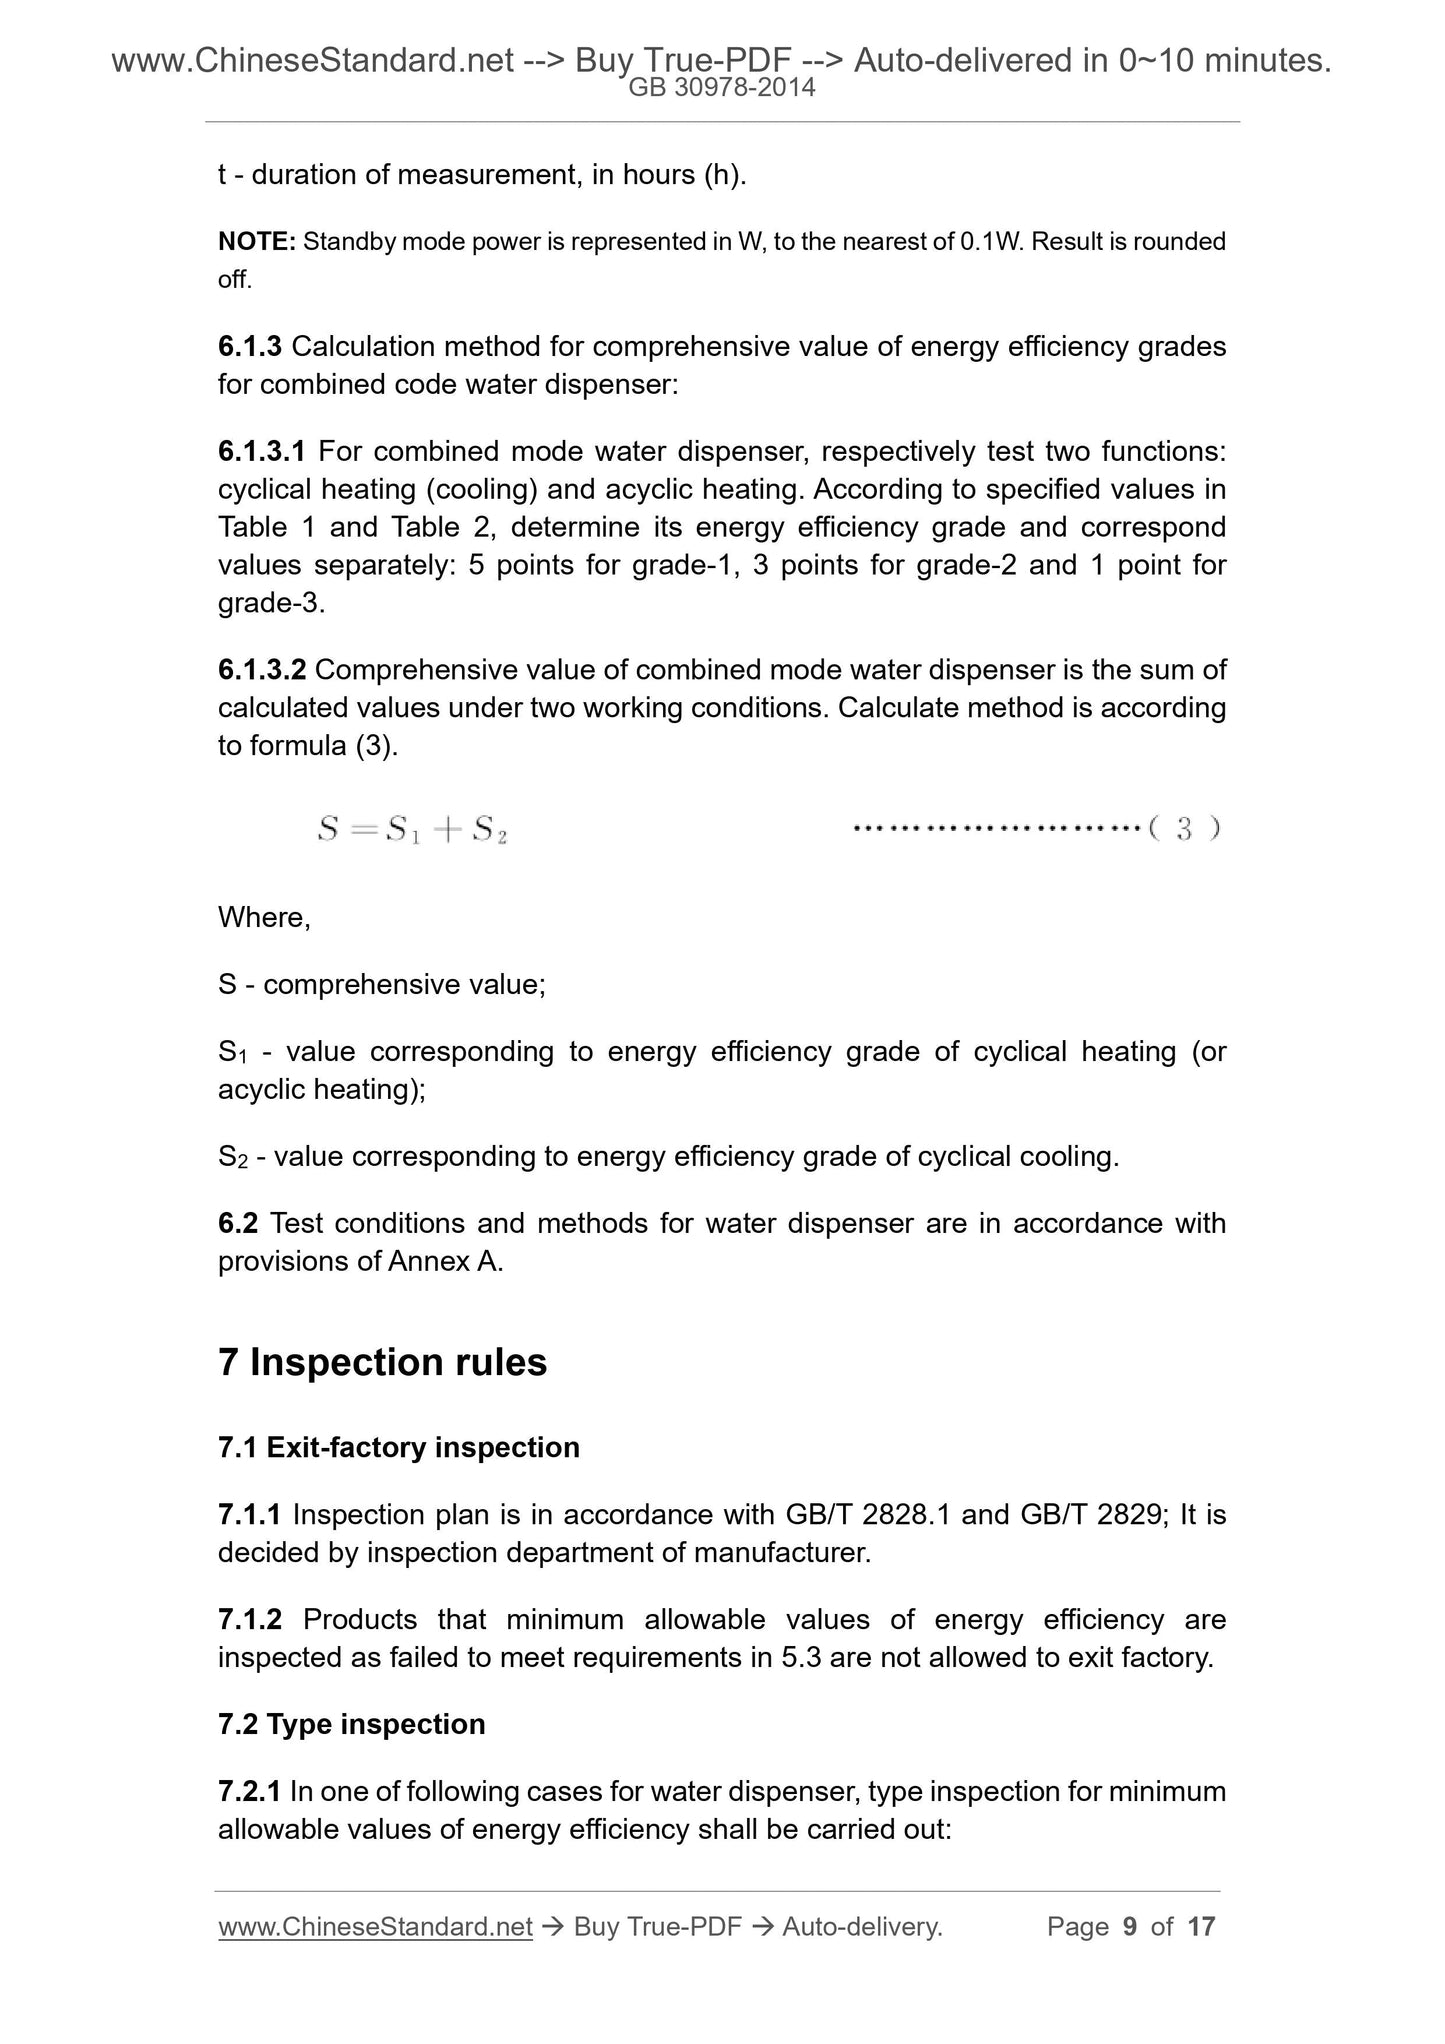 GB 30978-2014 Page 5